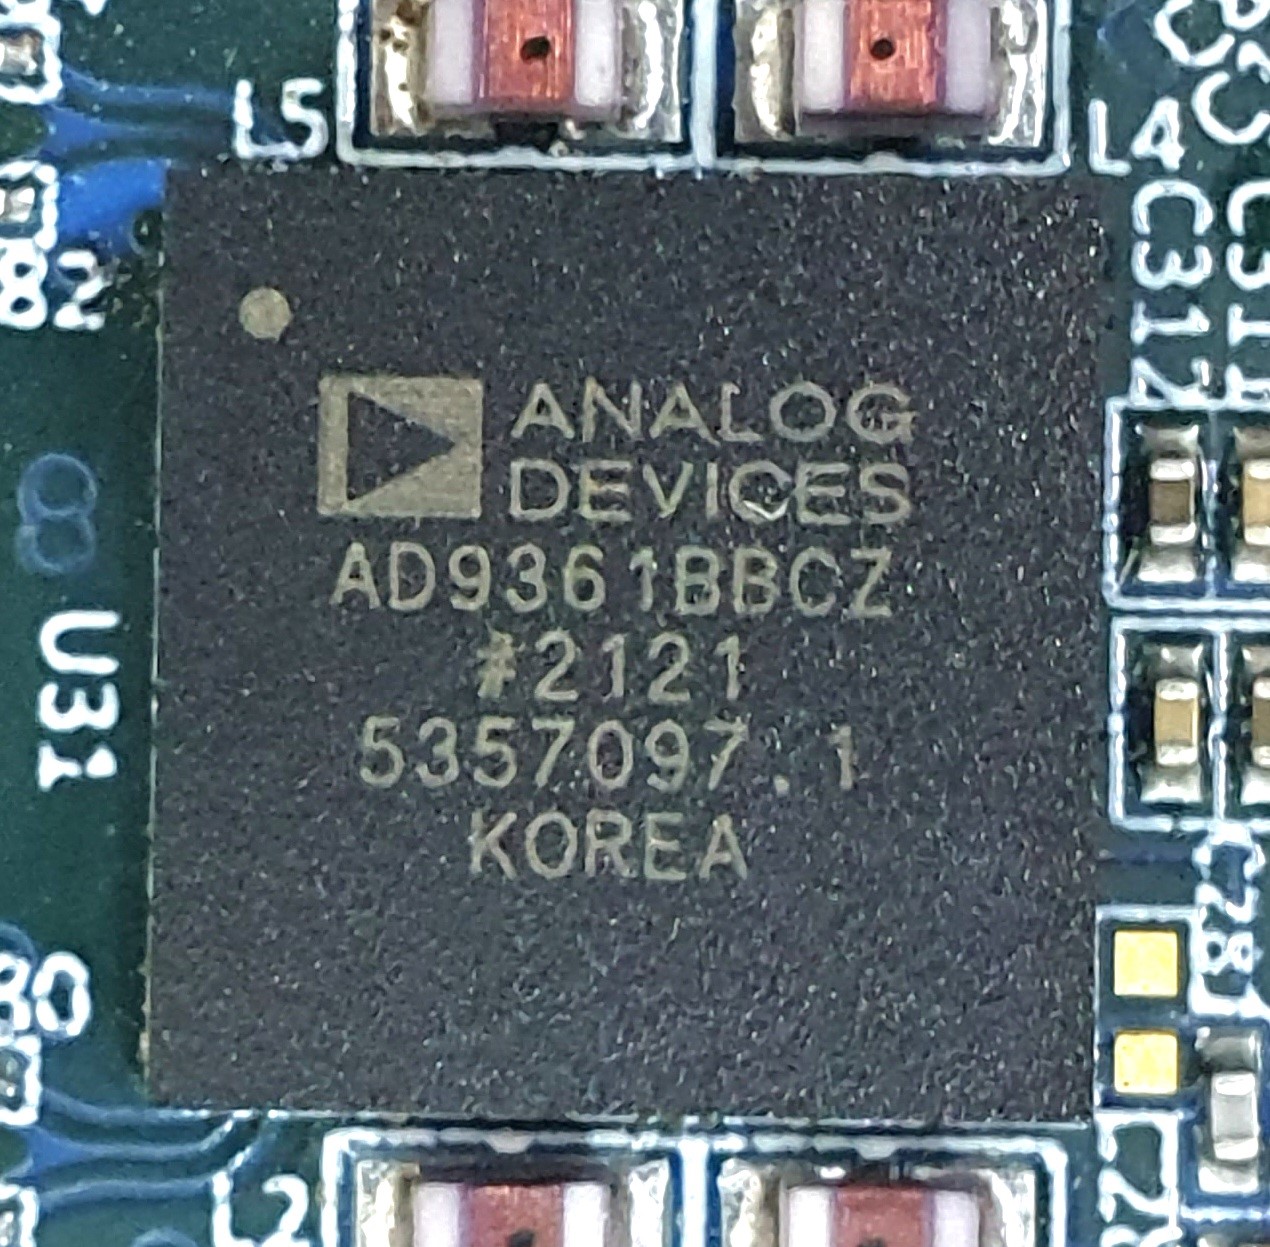  2×2 RF transceiver with built-in 12-bit DAC and ADC